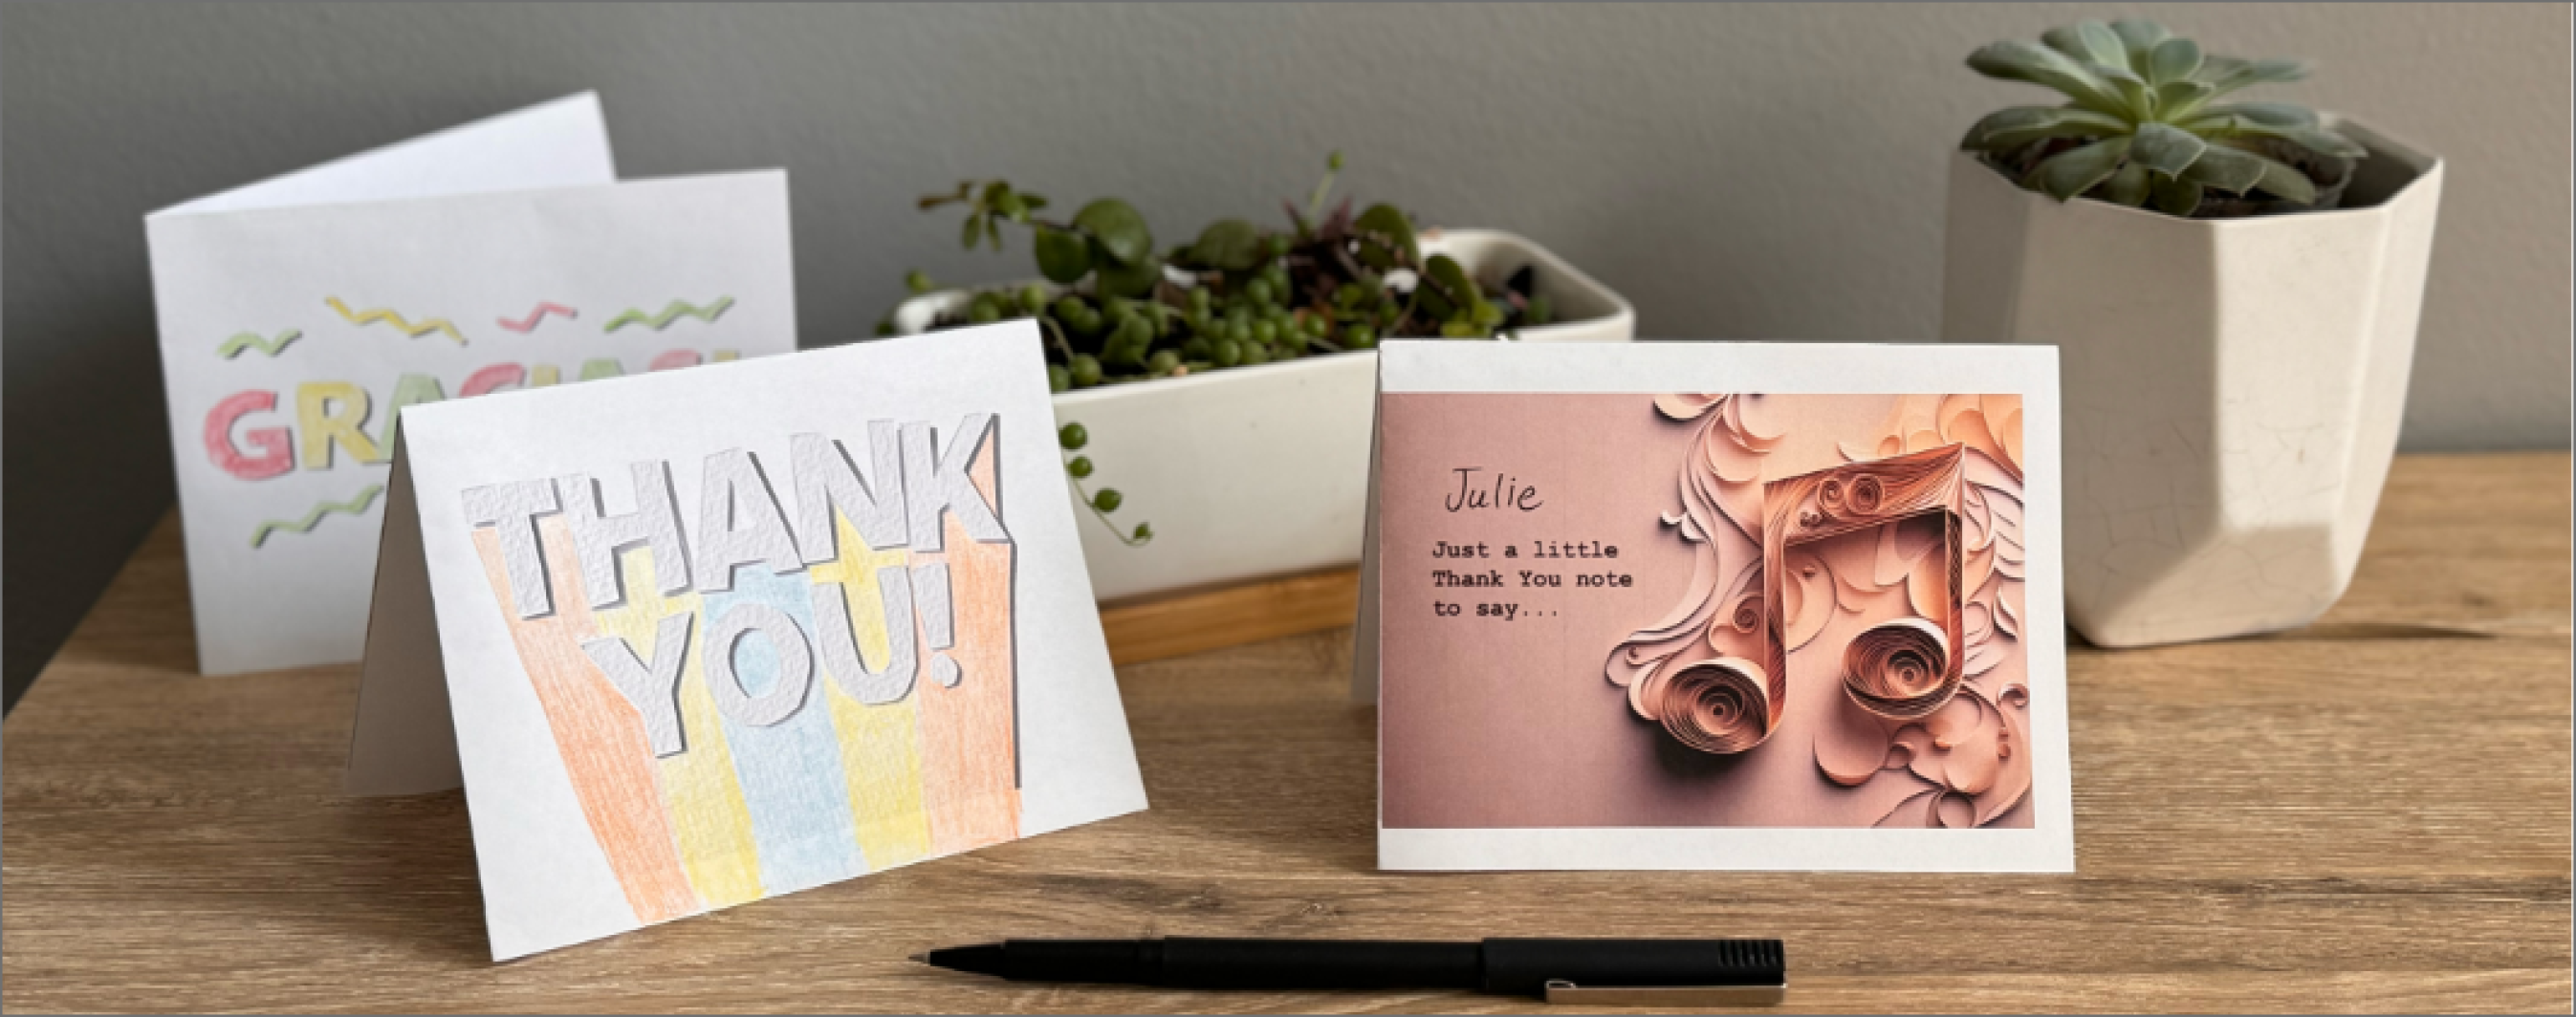 thank you notes and cards displayed on a table